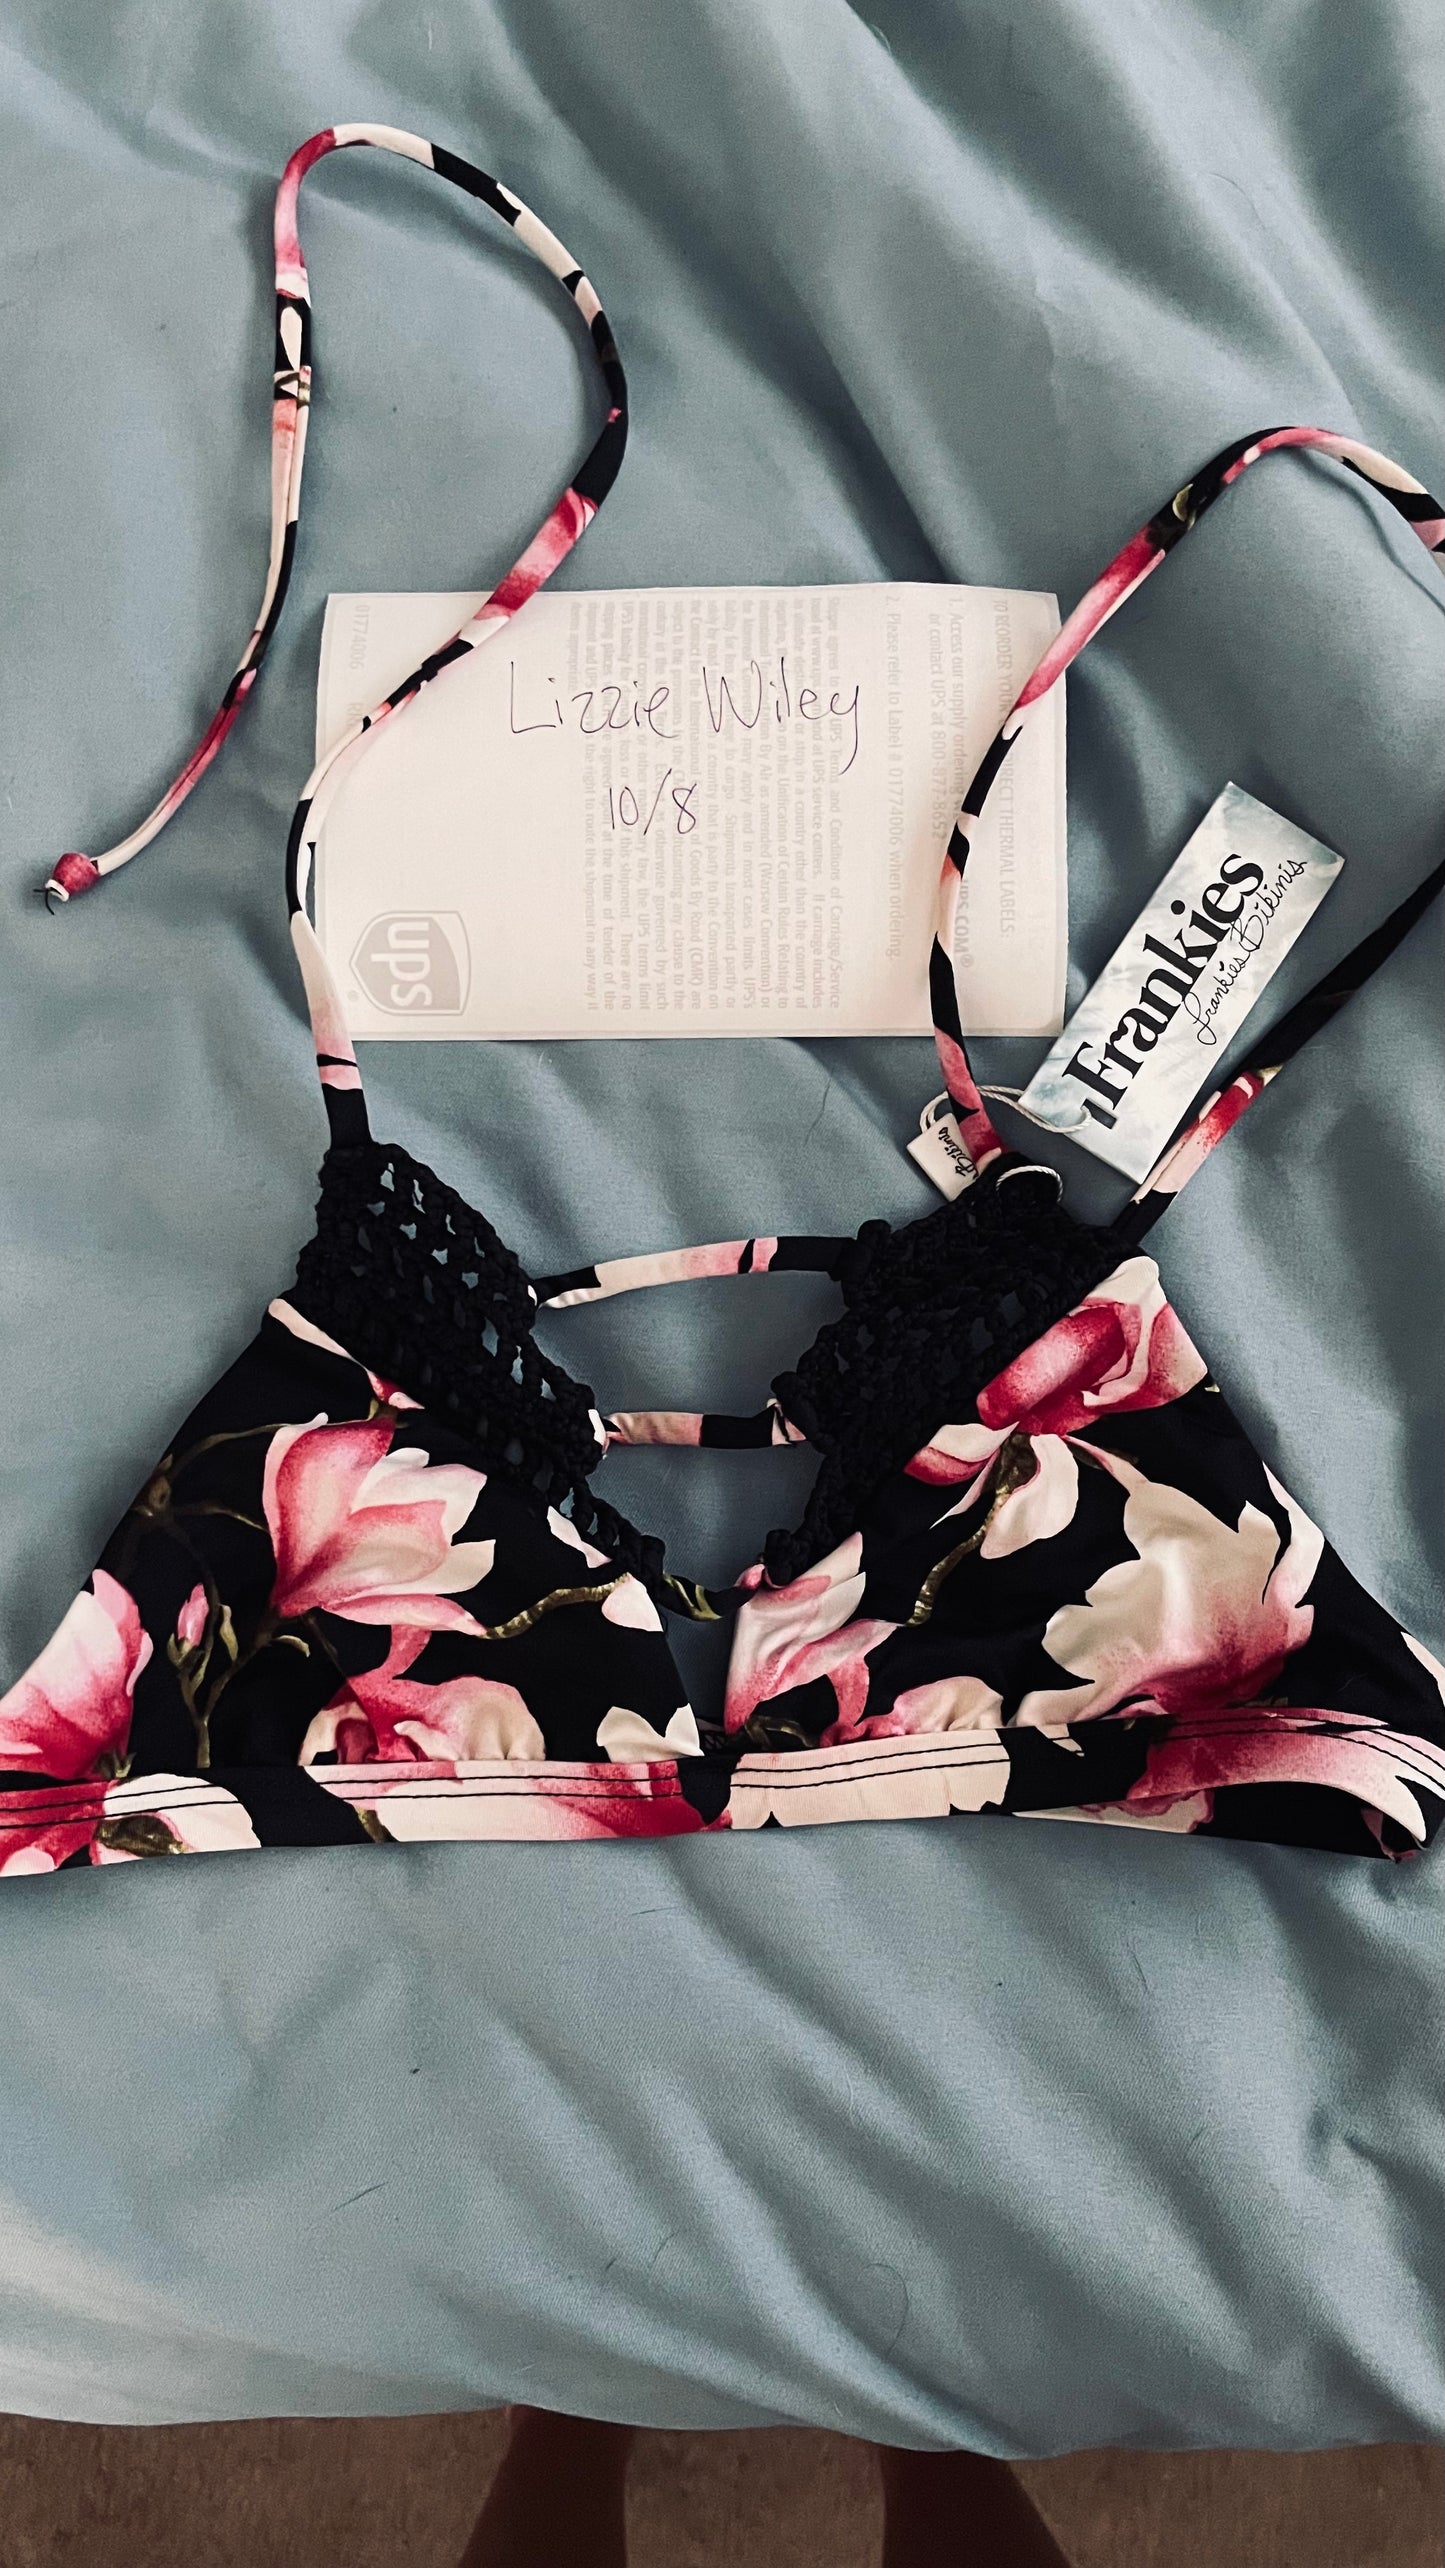 Black and pink foral bikini suit